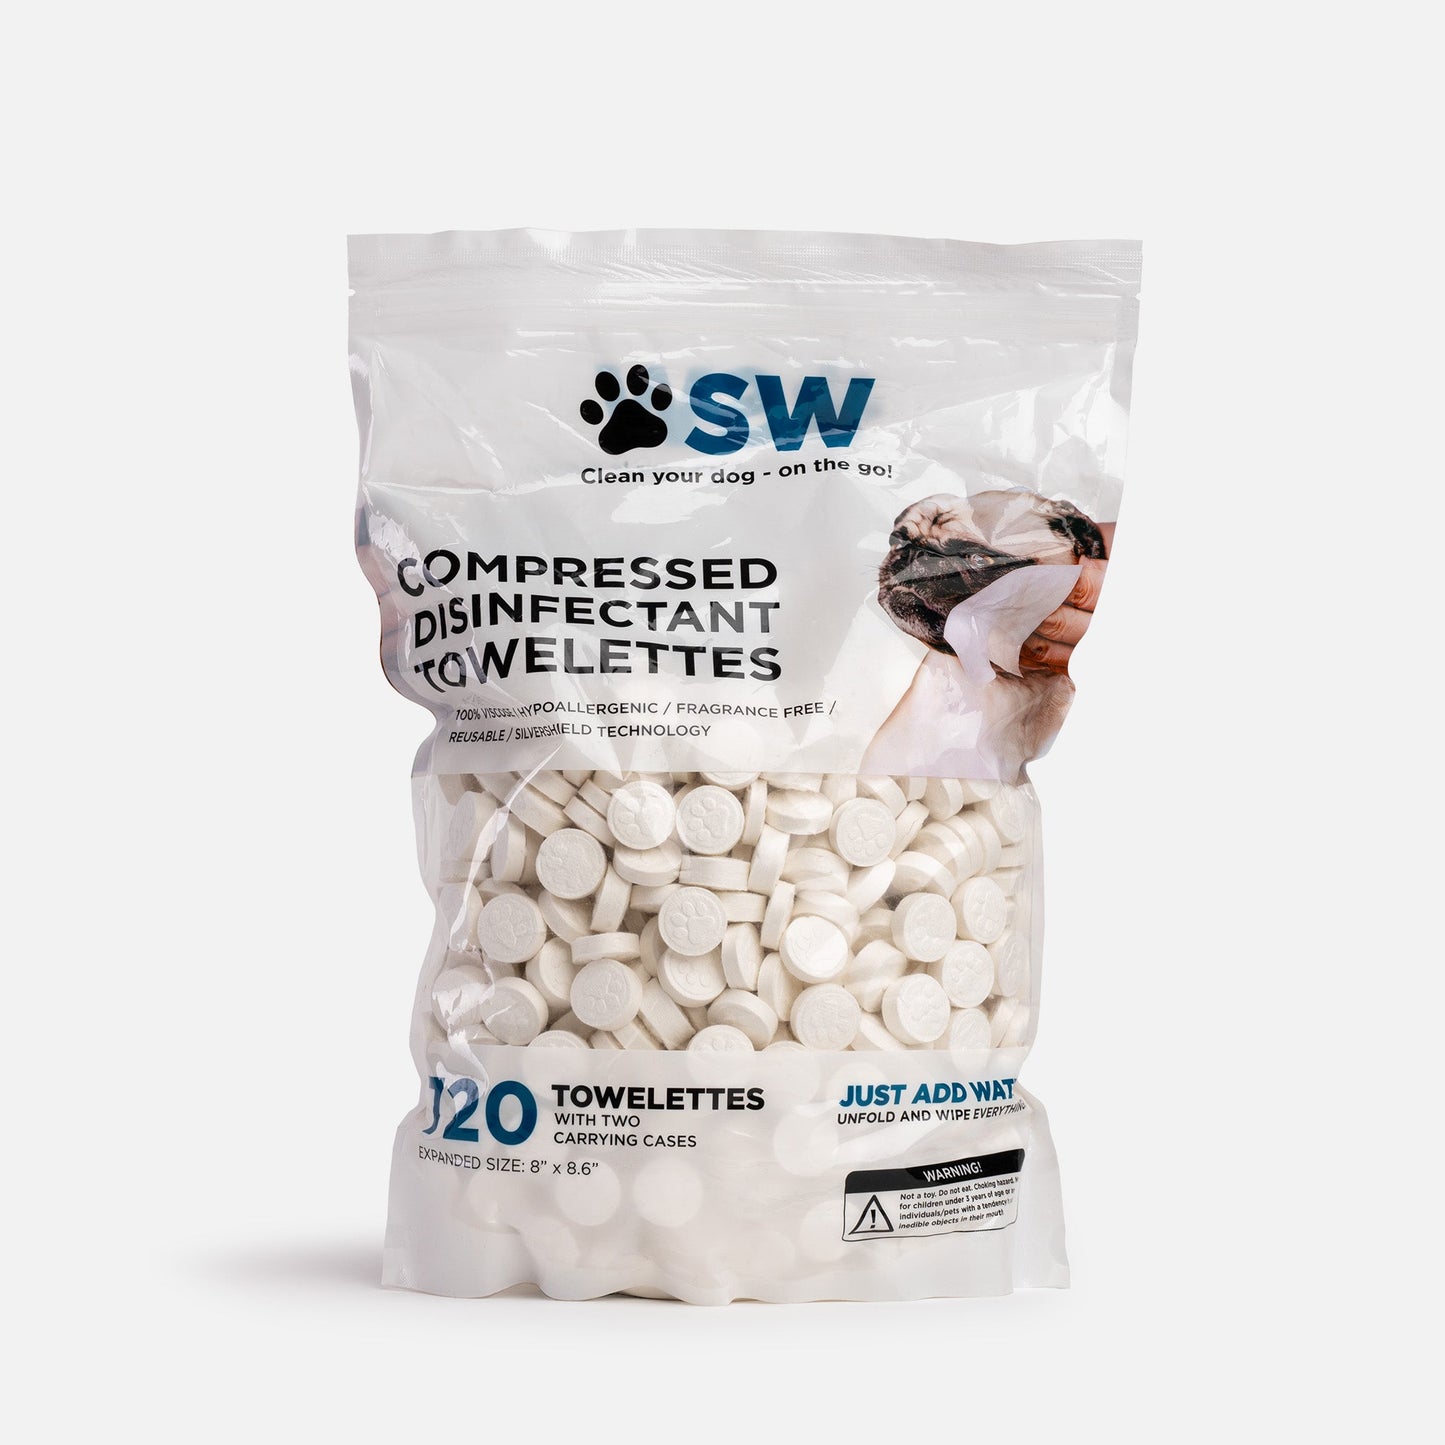 On The Go Compressed Dog Wipes- 720 per pack